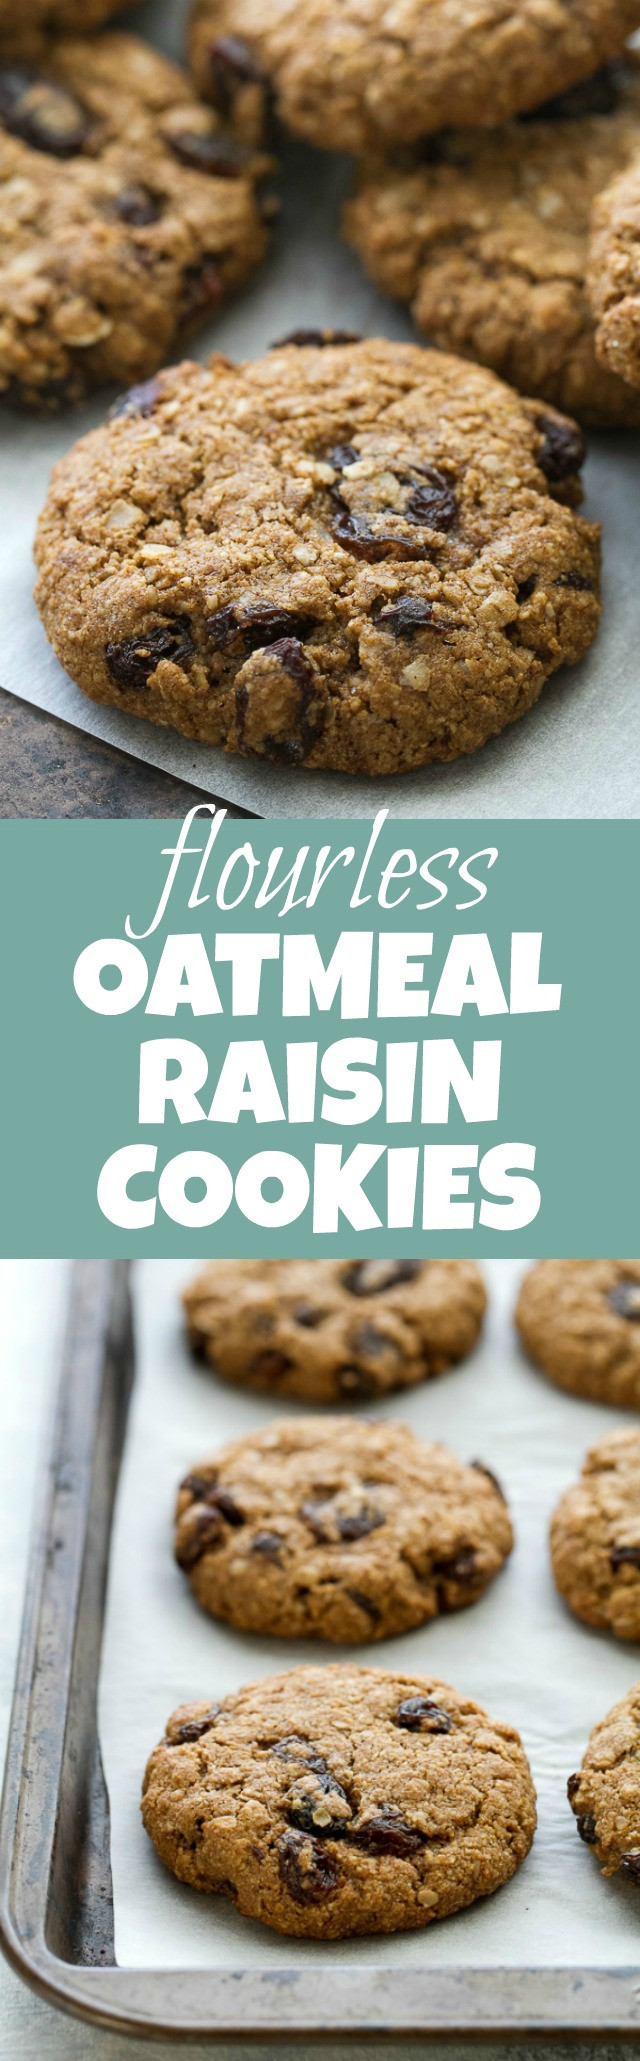 Soft Oatmeal Raisin Cookies Recipes
 Soft & Chewy Flourless Oatmeal Raisin Cookies